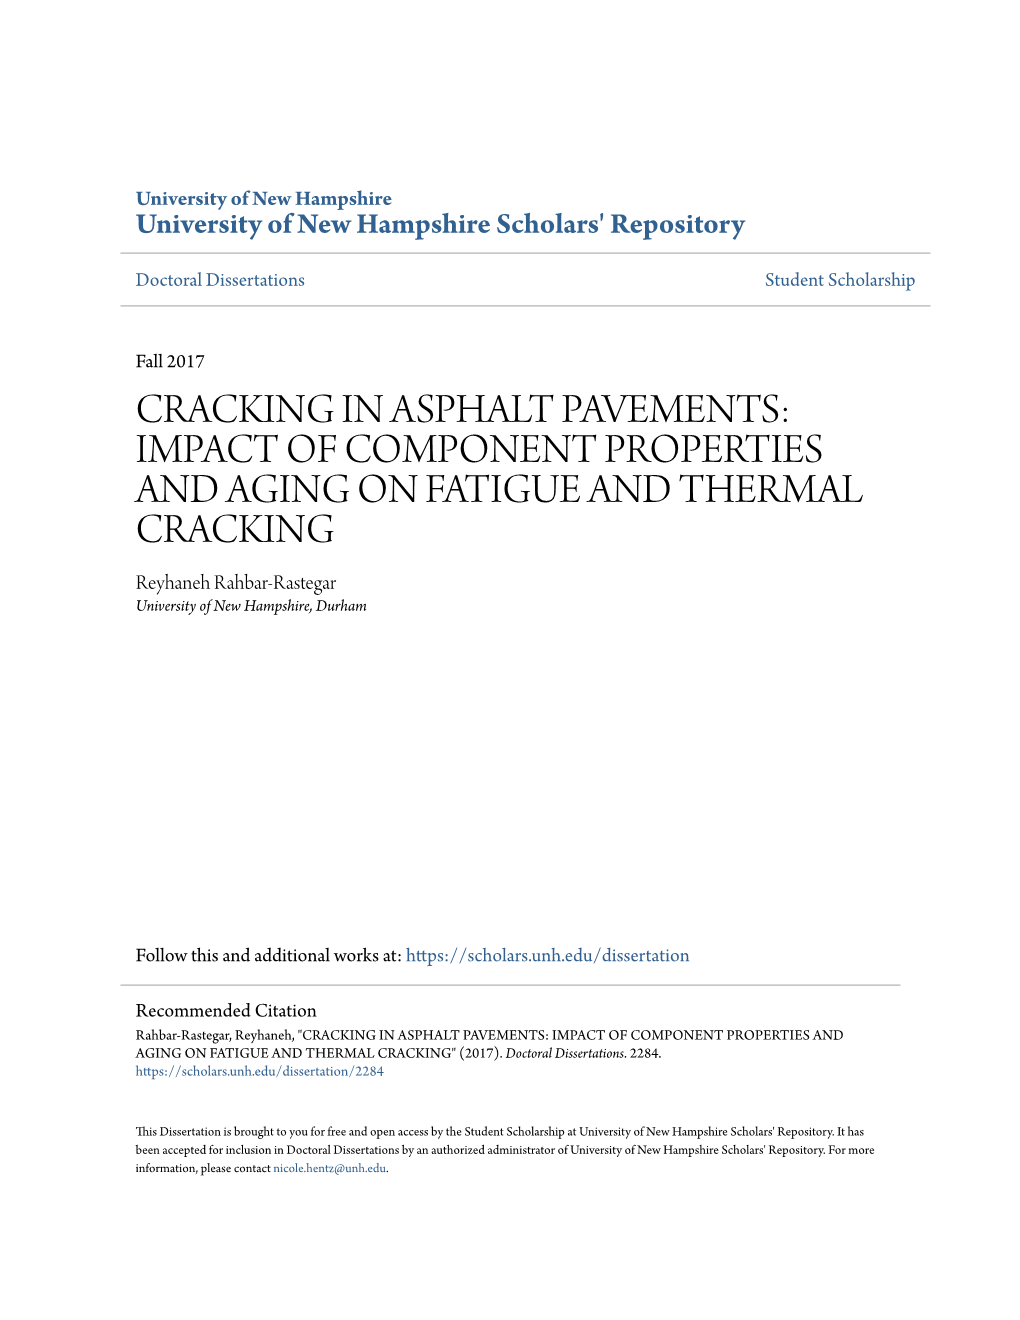 CRACKING in ASPHALT PAVEMENTS: IMPACT of COMPONENT PROPERTIES and AGING on FATIGUE and THERMAL CRACKING Reyhaneh Rahbar-Rastegar University of New Hampshire, Durham